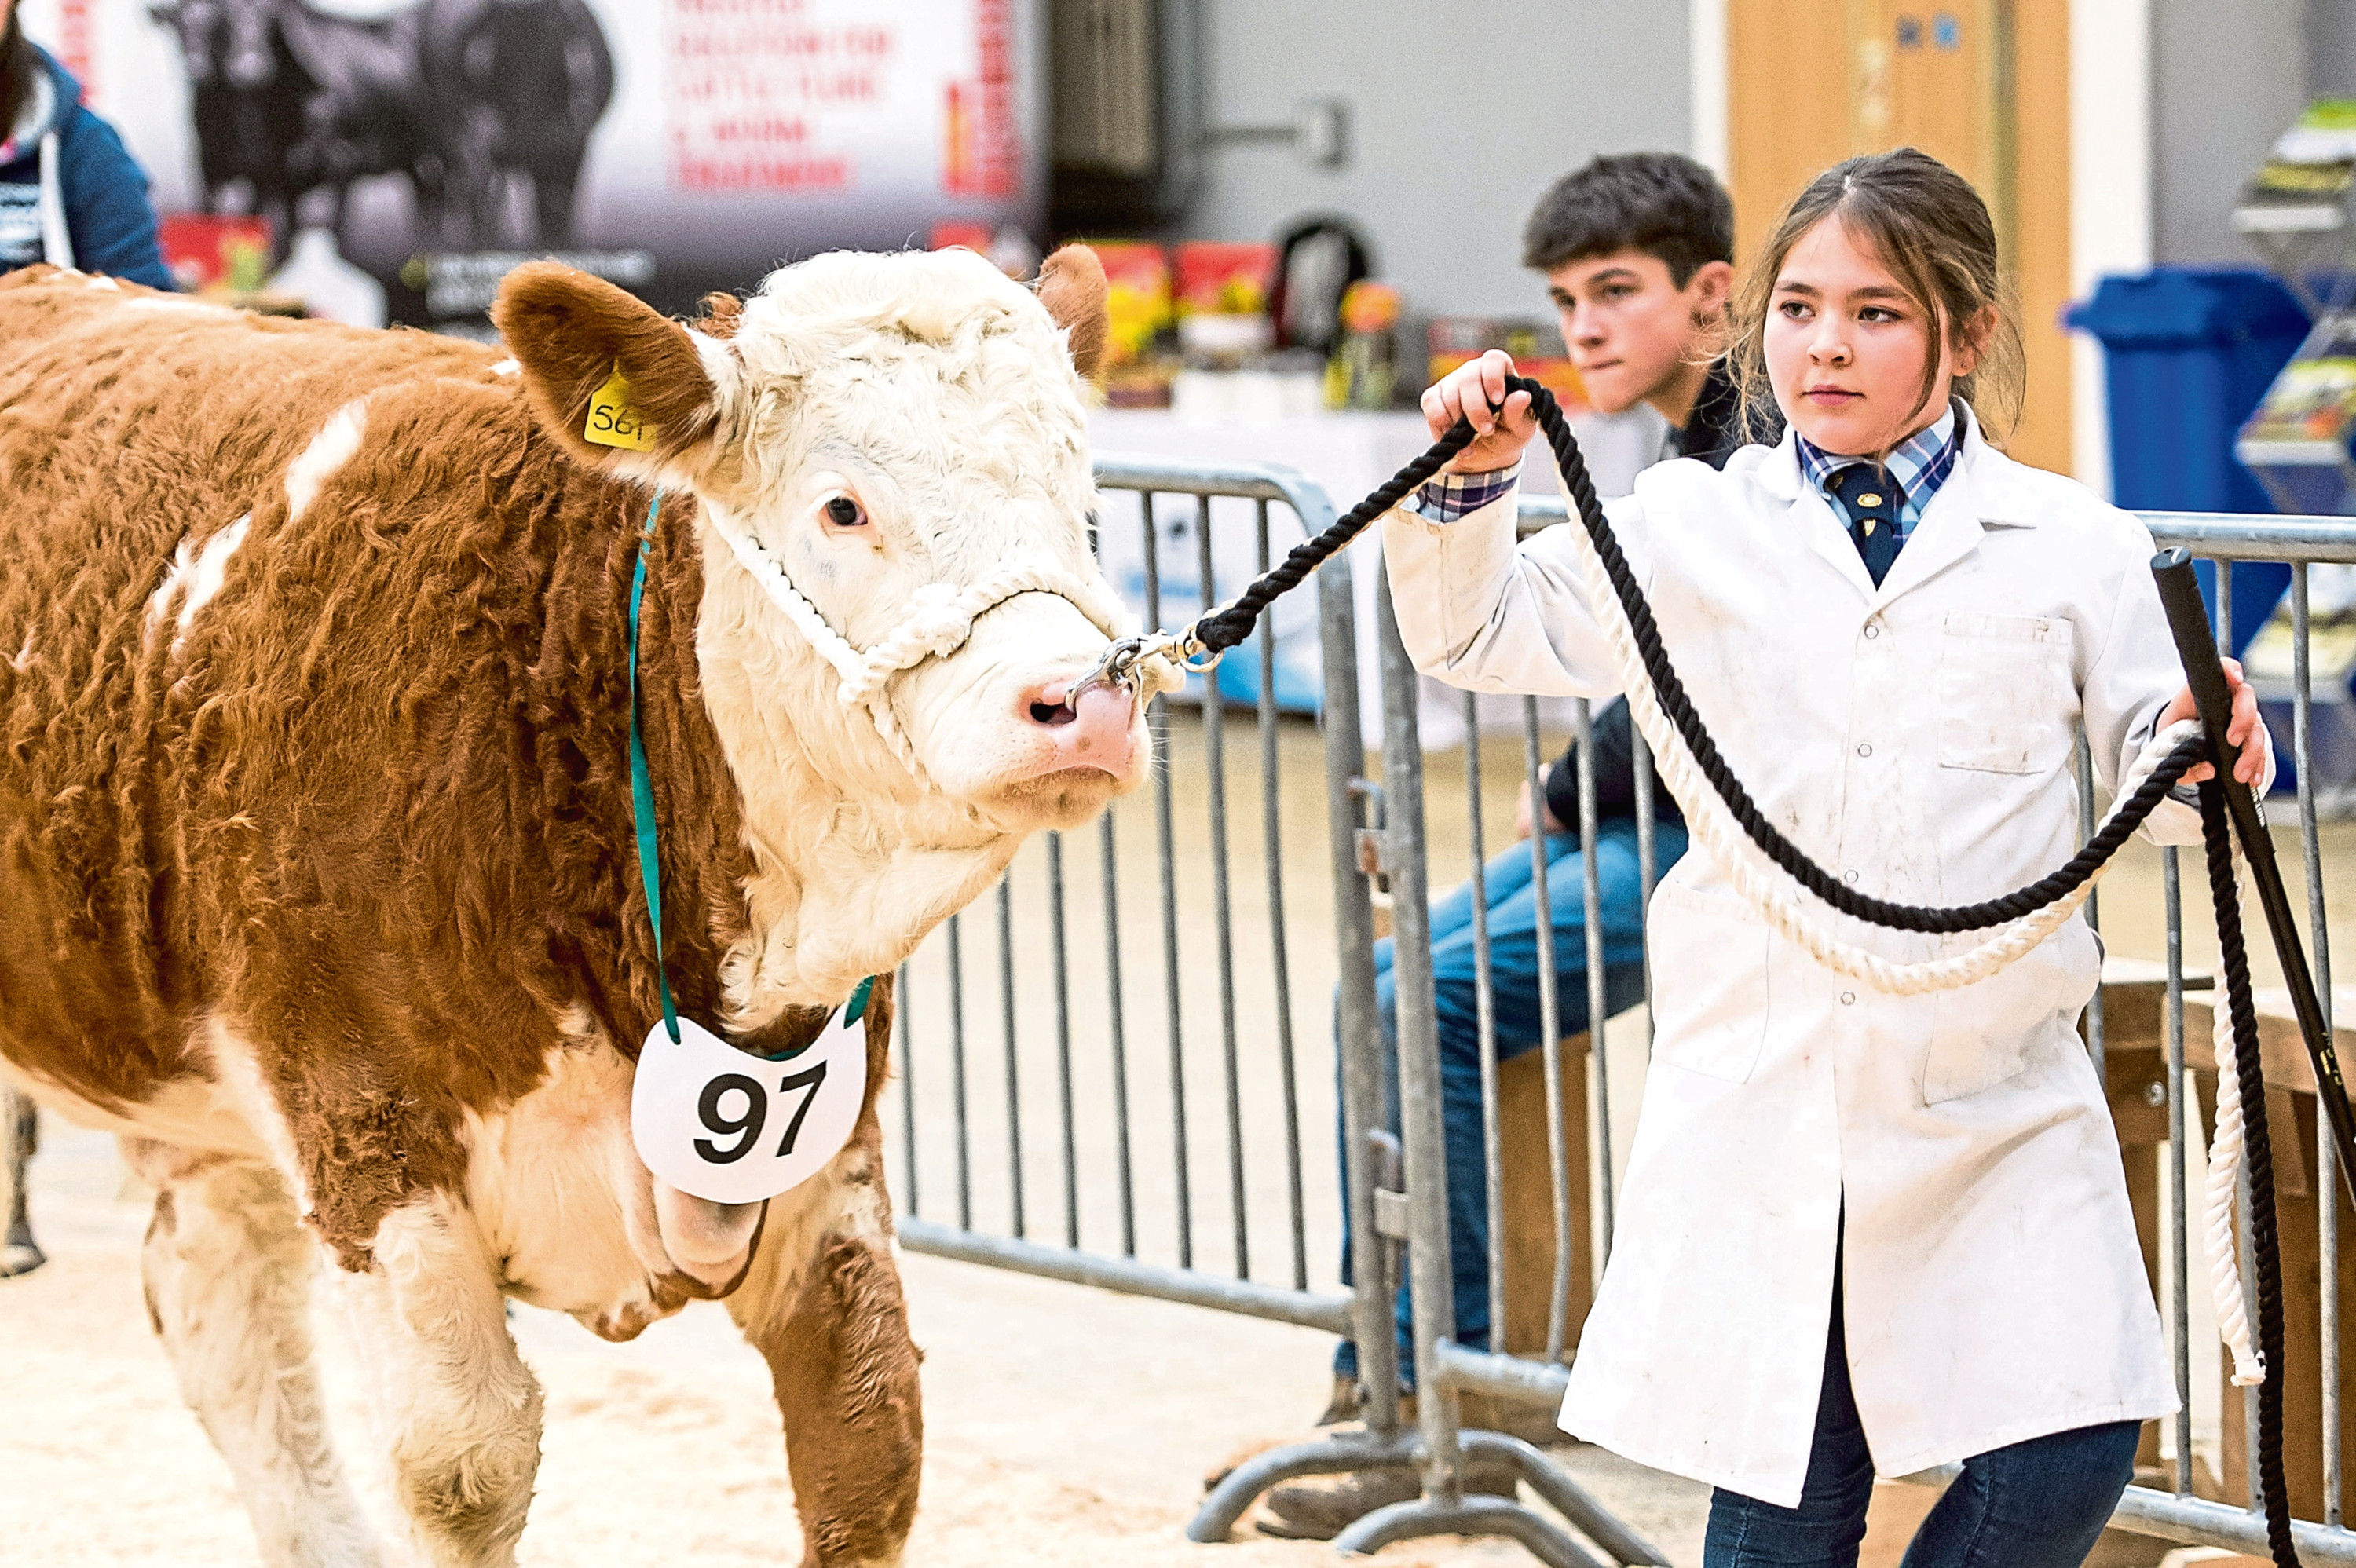 Stars of the Future calf show at Stirling Market